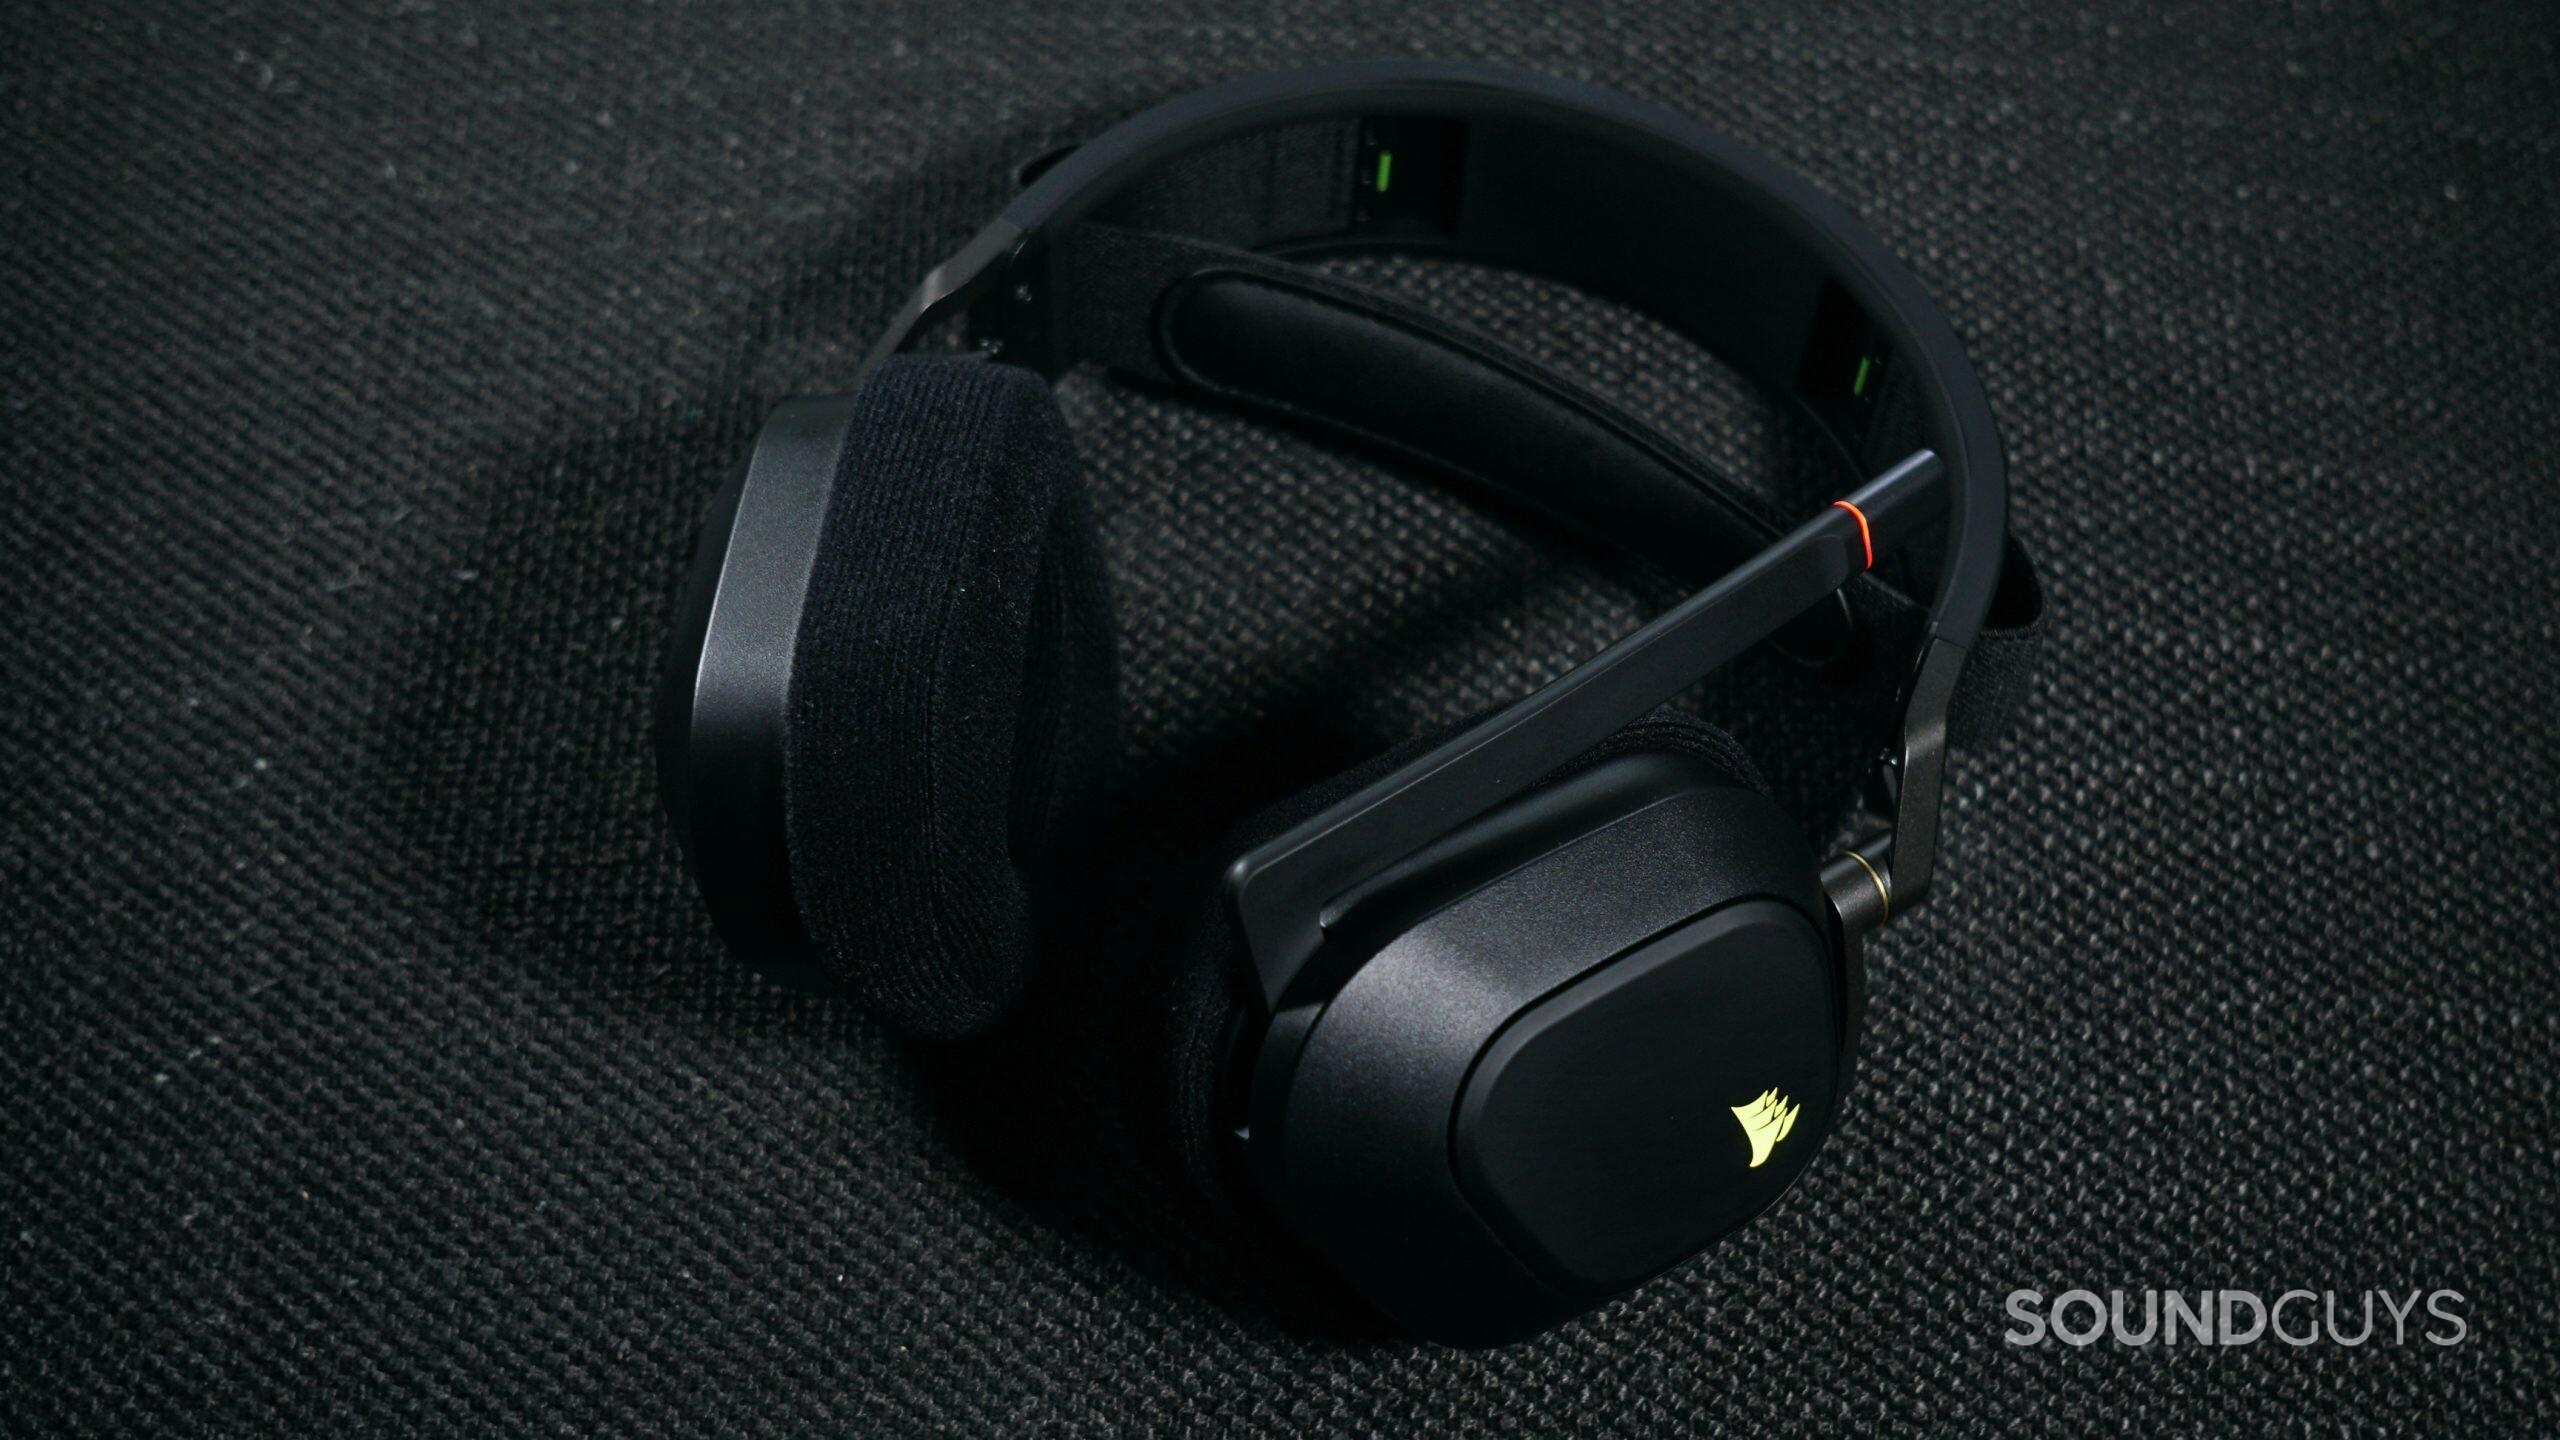 The Corsair HS80 RGB Wireless lays on a fabric surface, with its microphone flipped up.